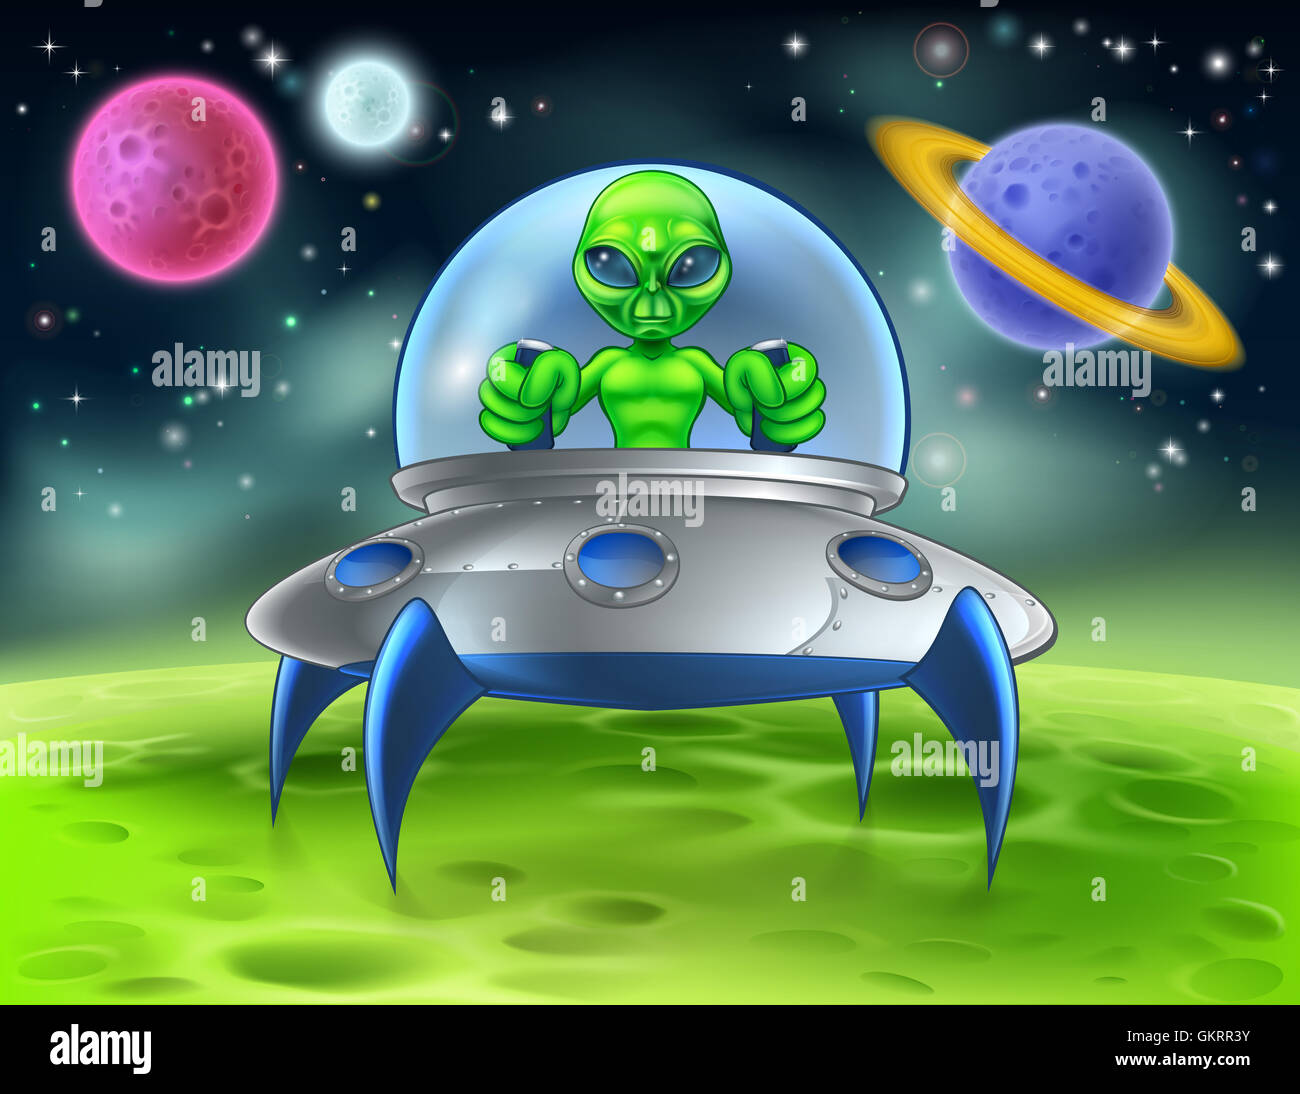 A little green man alien cartoon character piloting a flying saucer spaceship on a planet Stock Photo